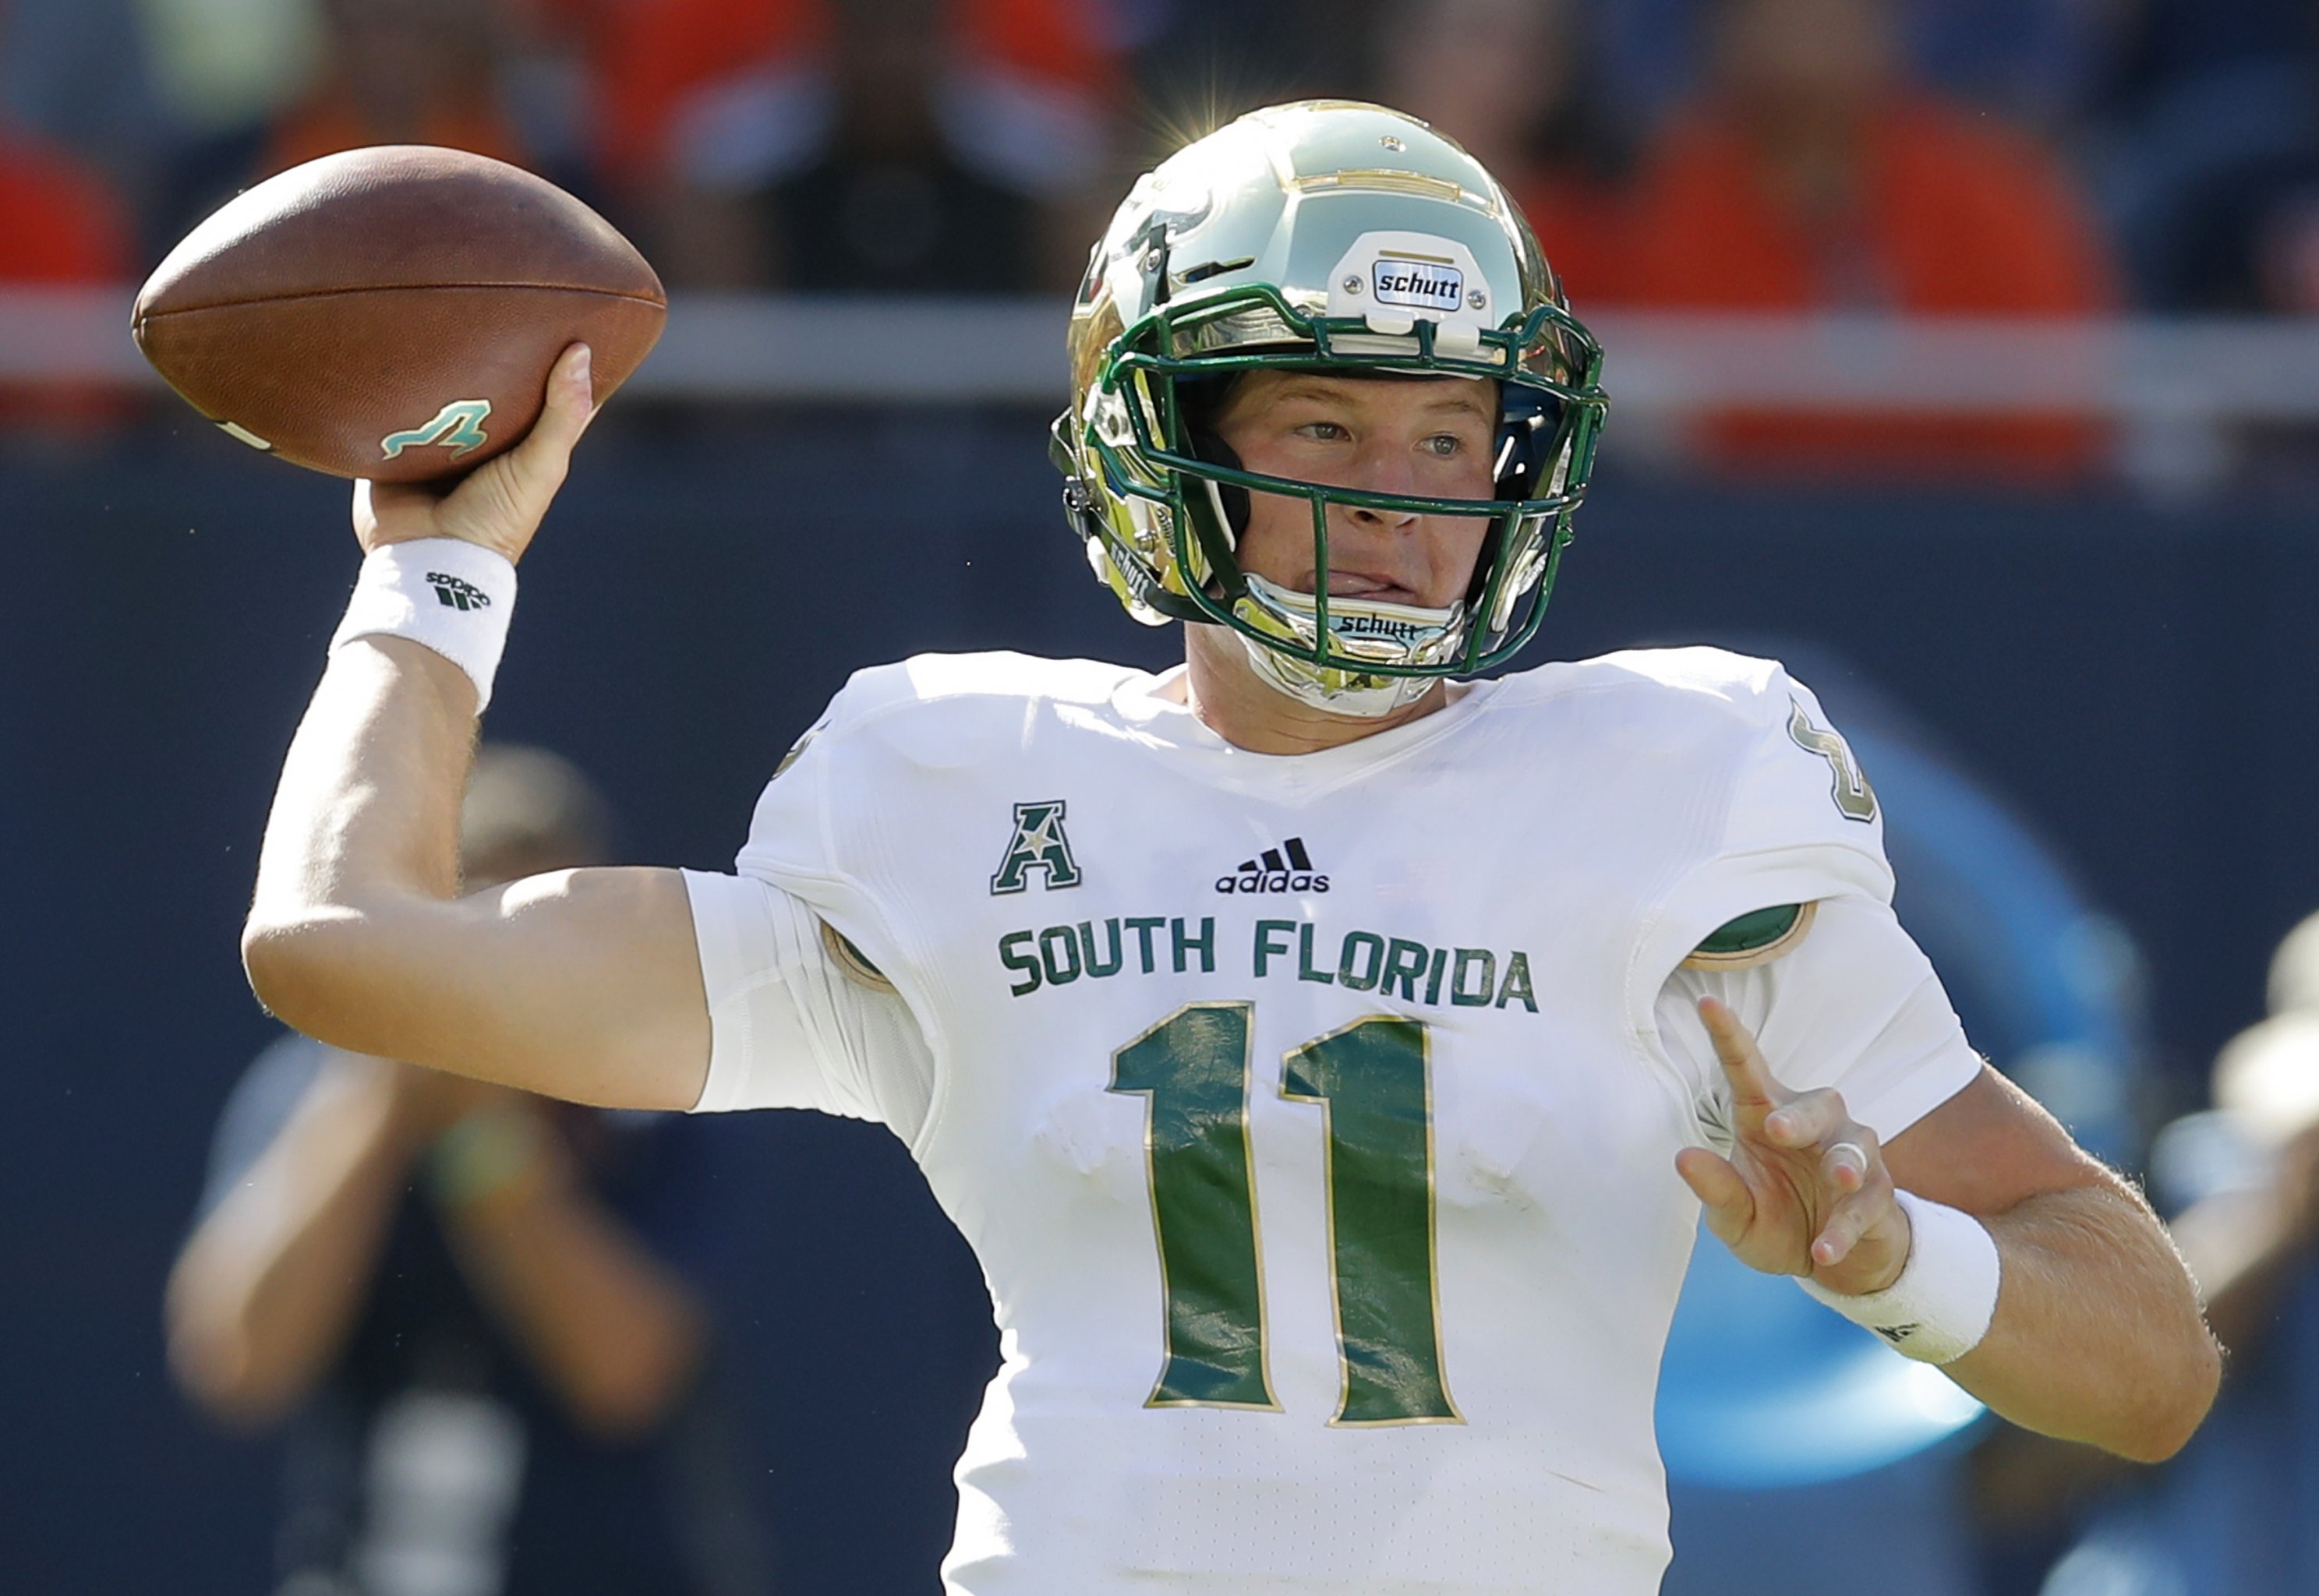 College football week 8 guide: USF needs a win, Clemson on upset watch